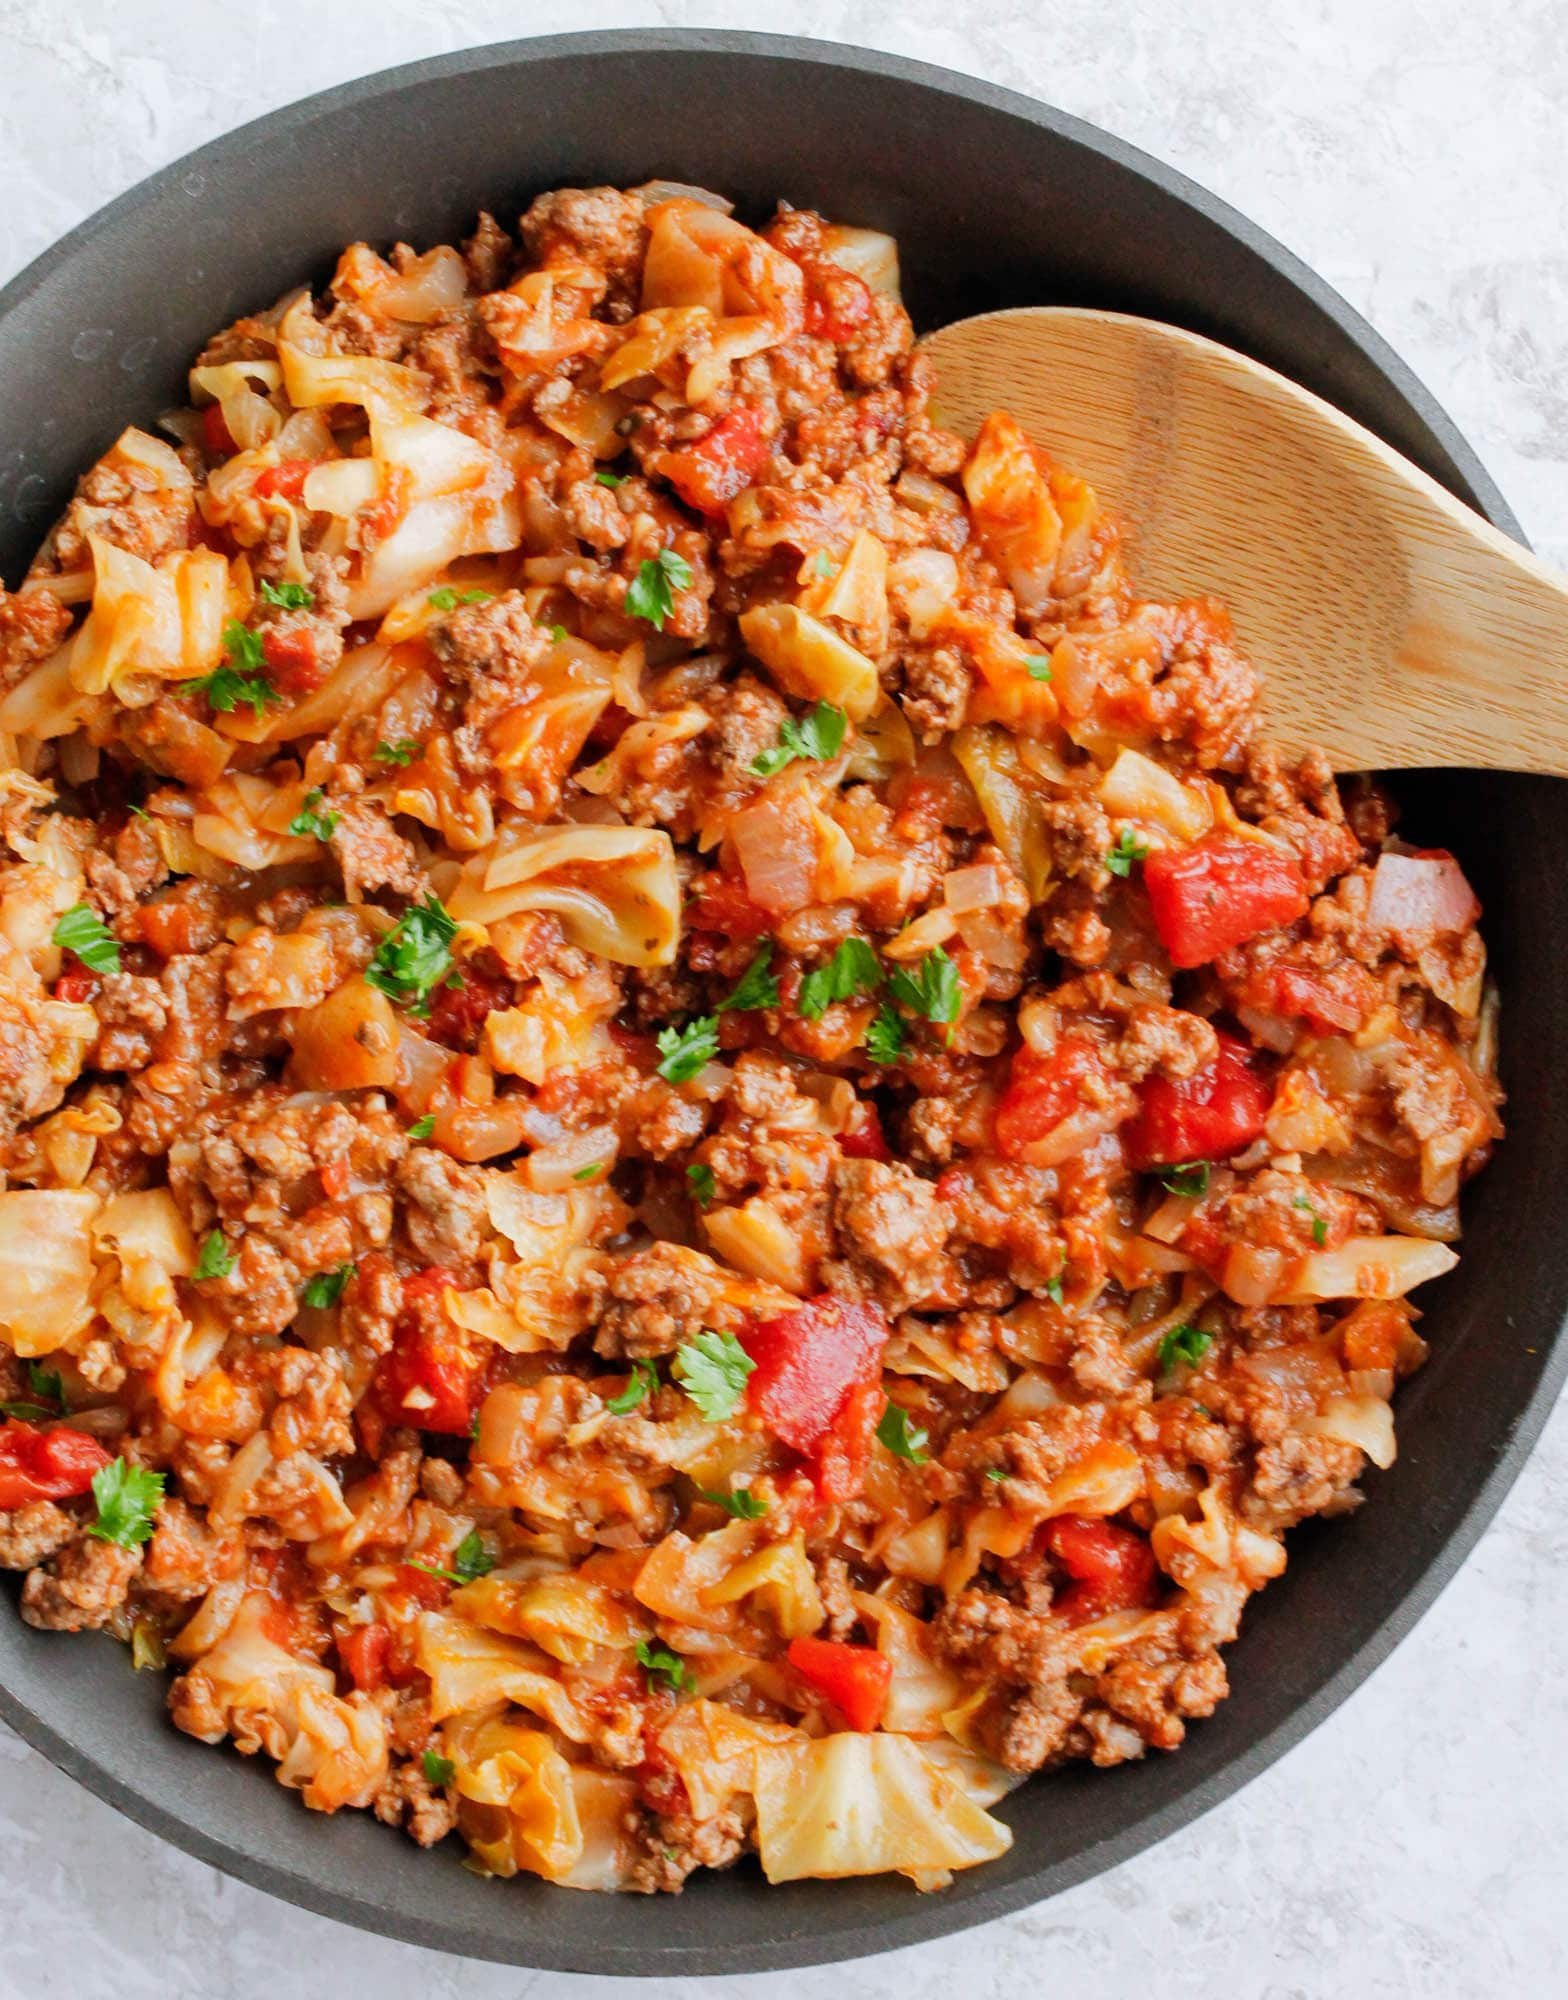 15 Of the Best Real Simple Cabbage and Ground Beef Skillet Ever